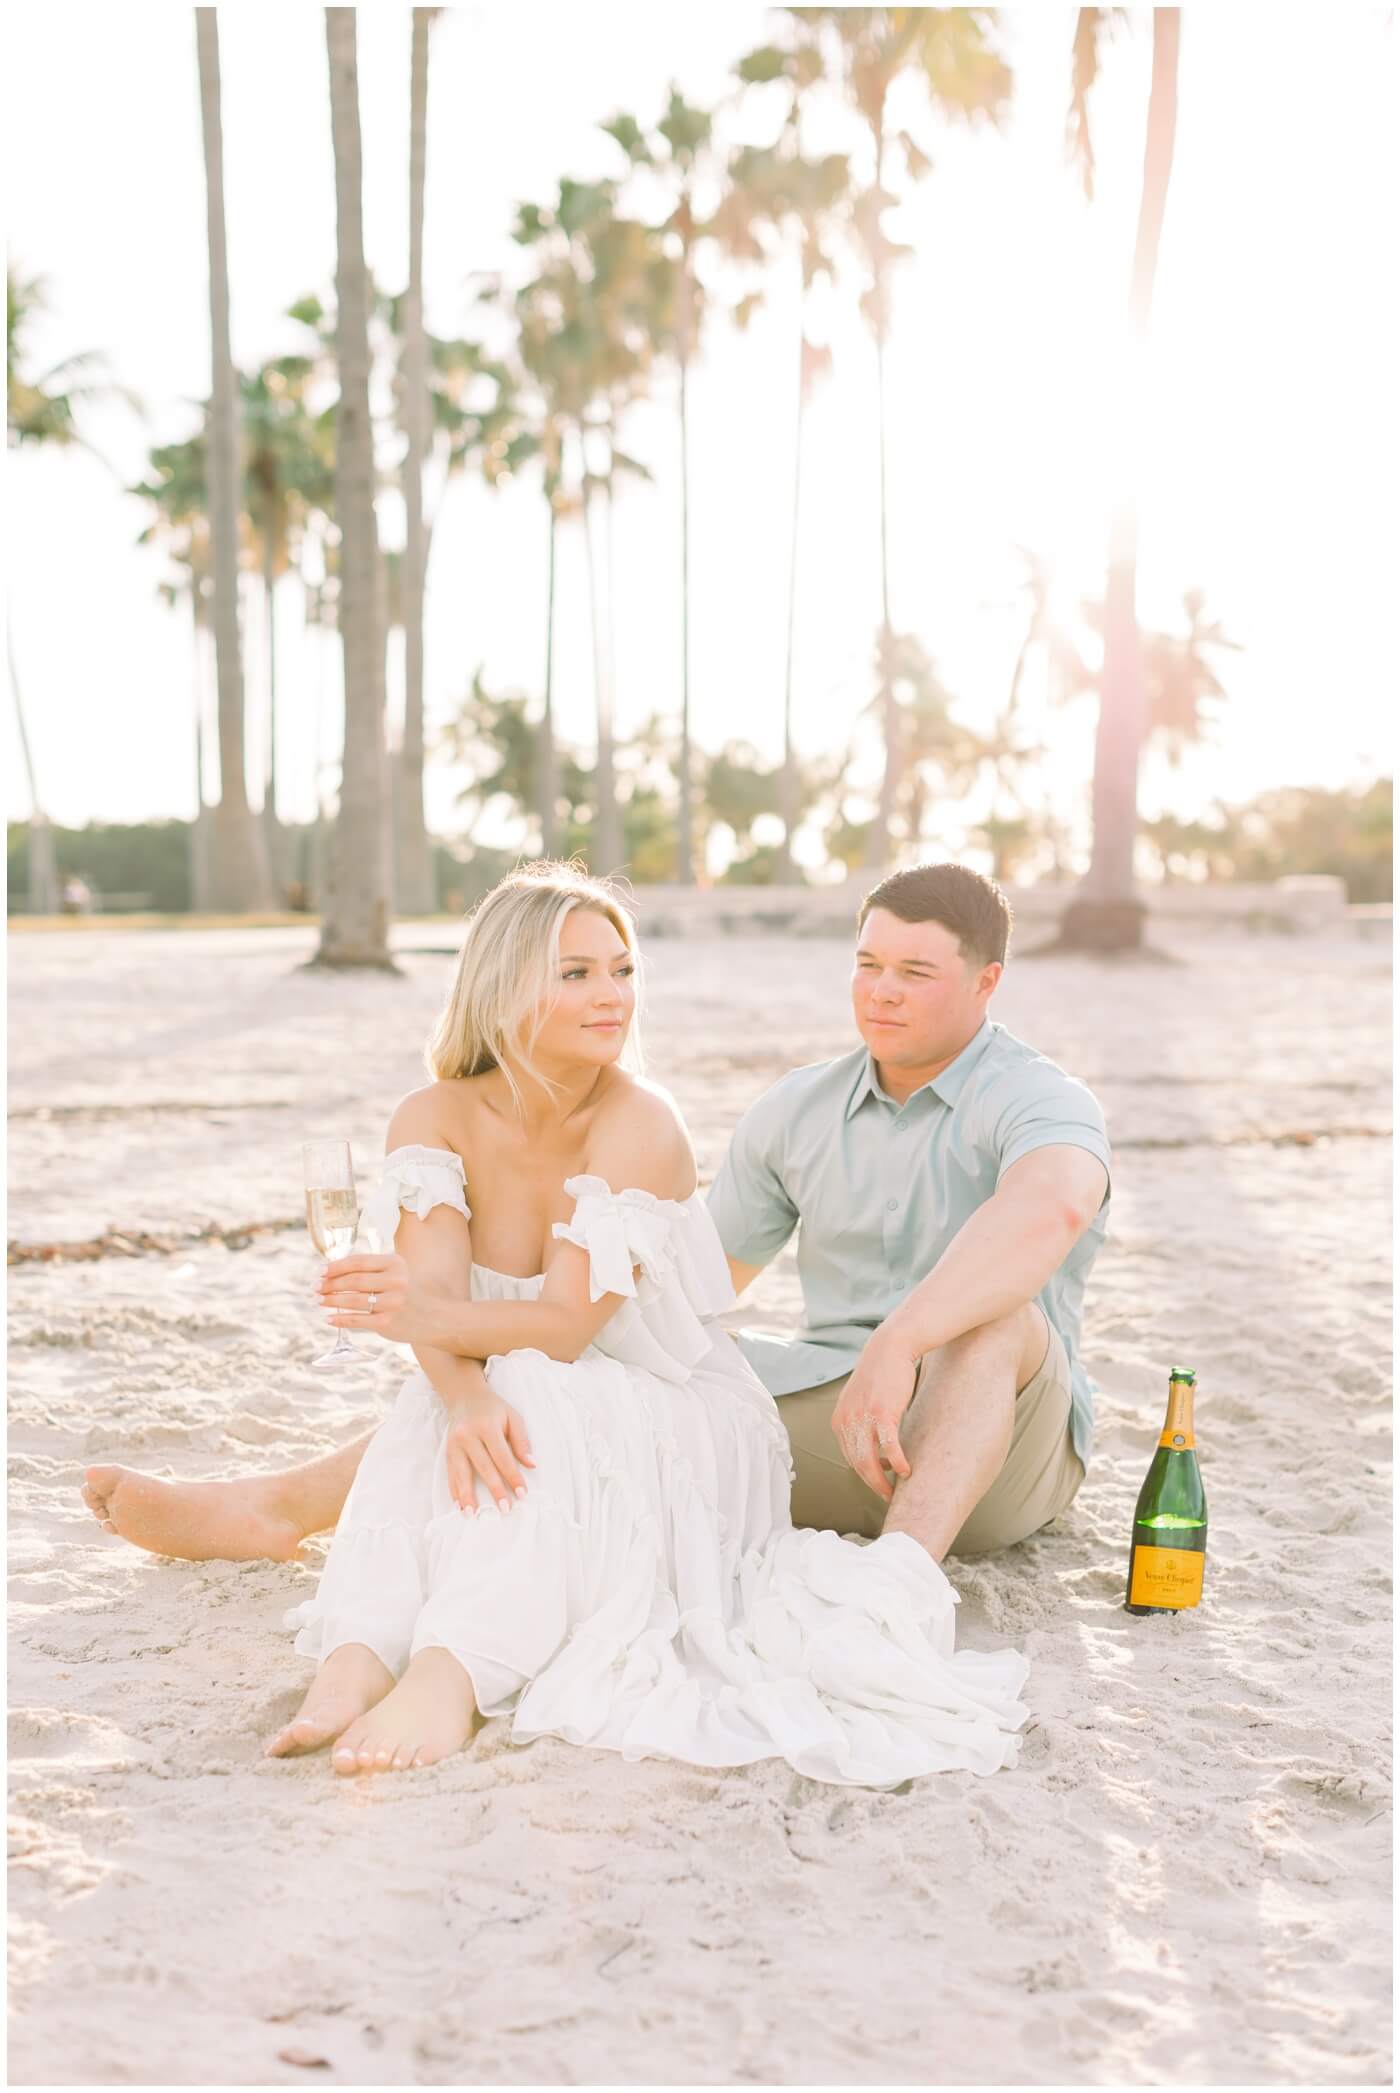 Couple celebrates their engagement with champagne on the beach in Miami.